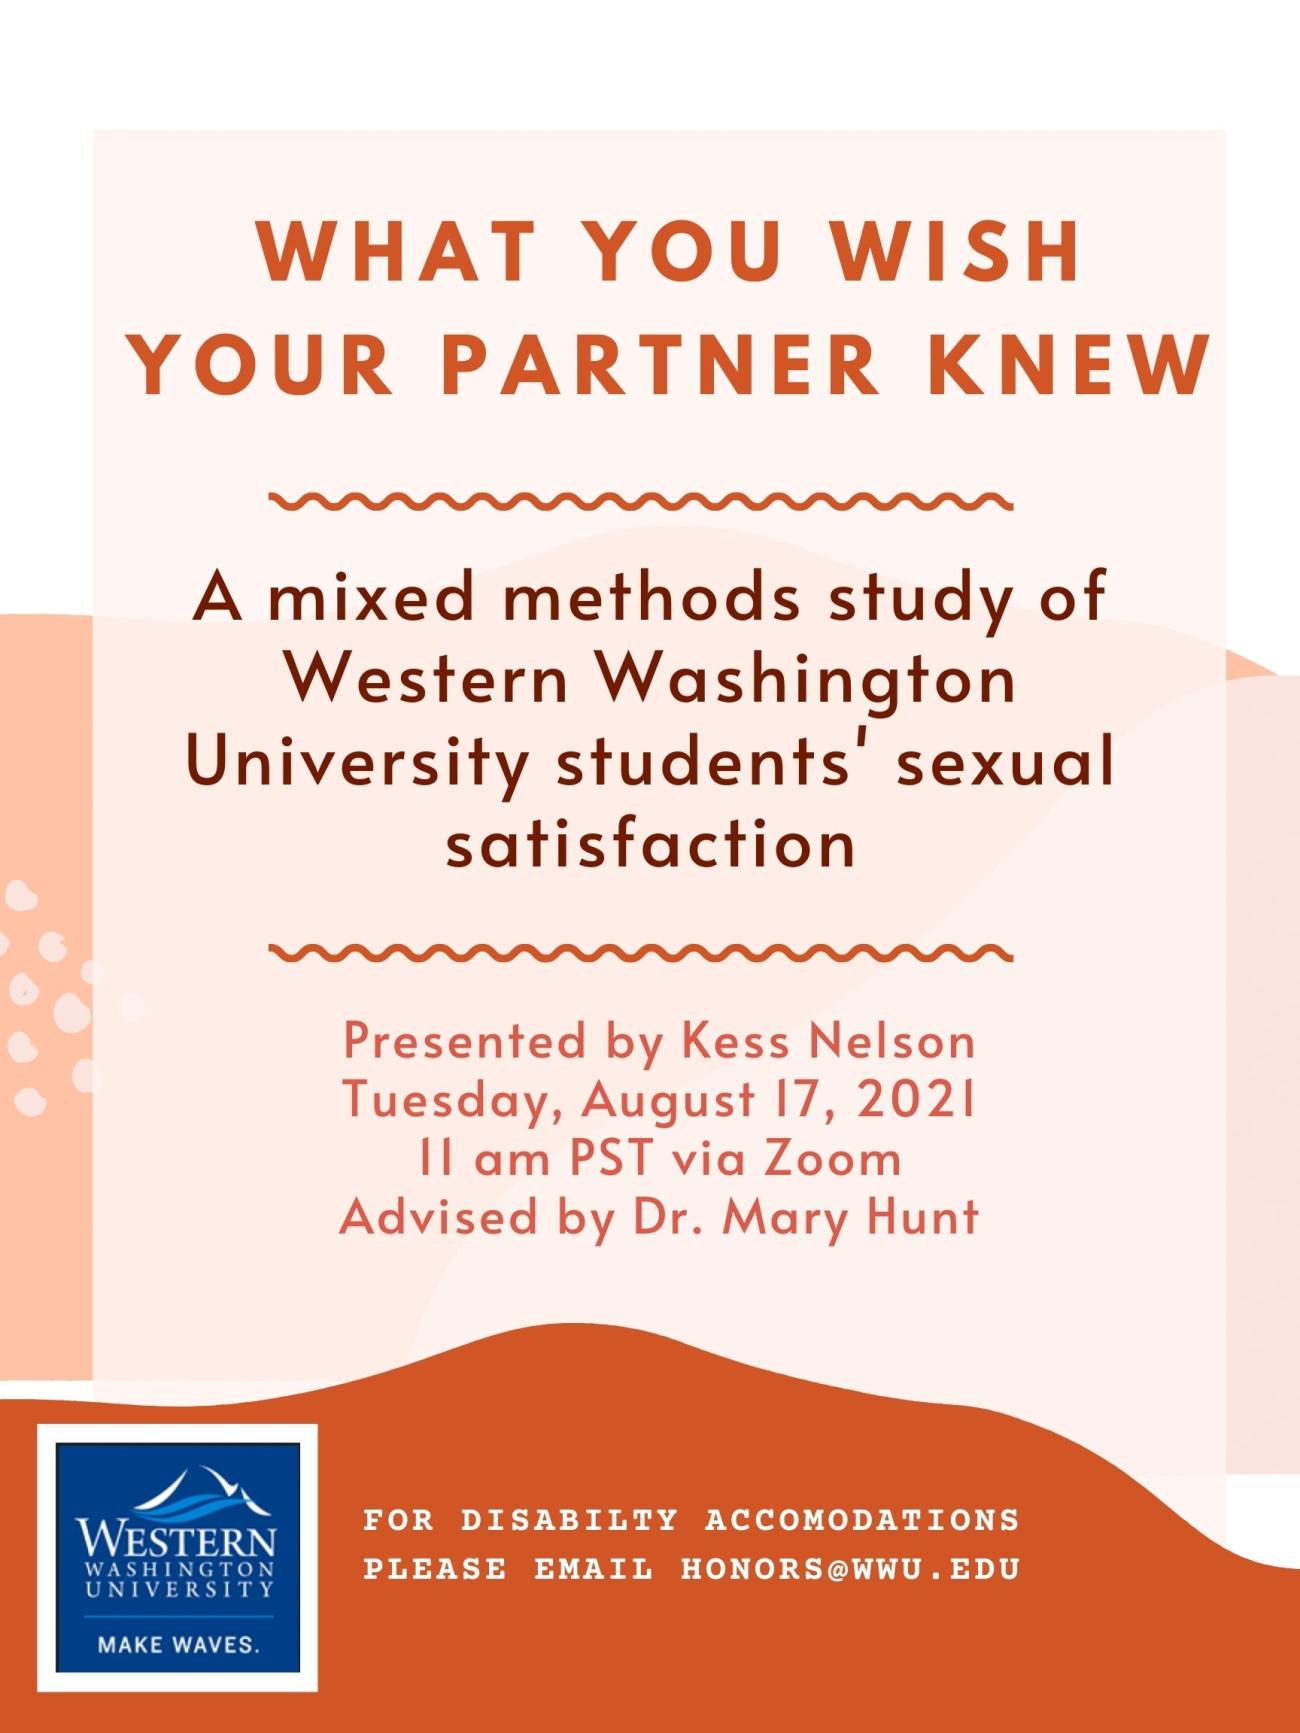 What You Wish Your Partner Knew: A mixed methods study of Western Washington University students' sexual satisfaction